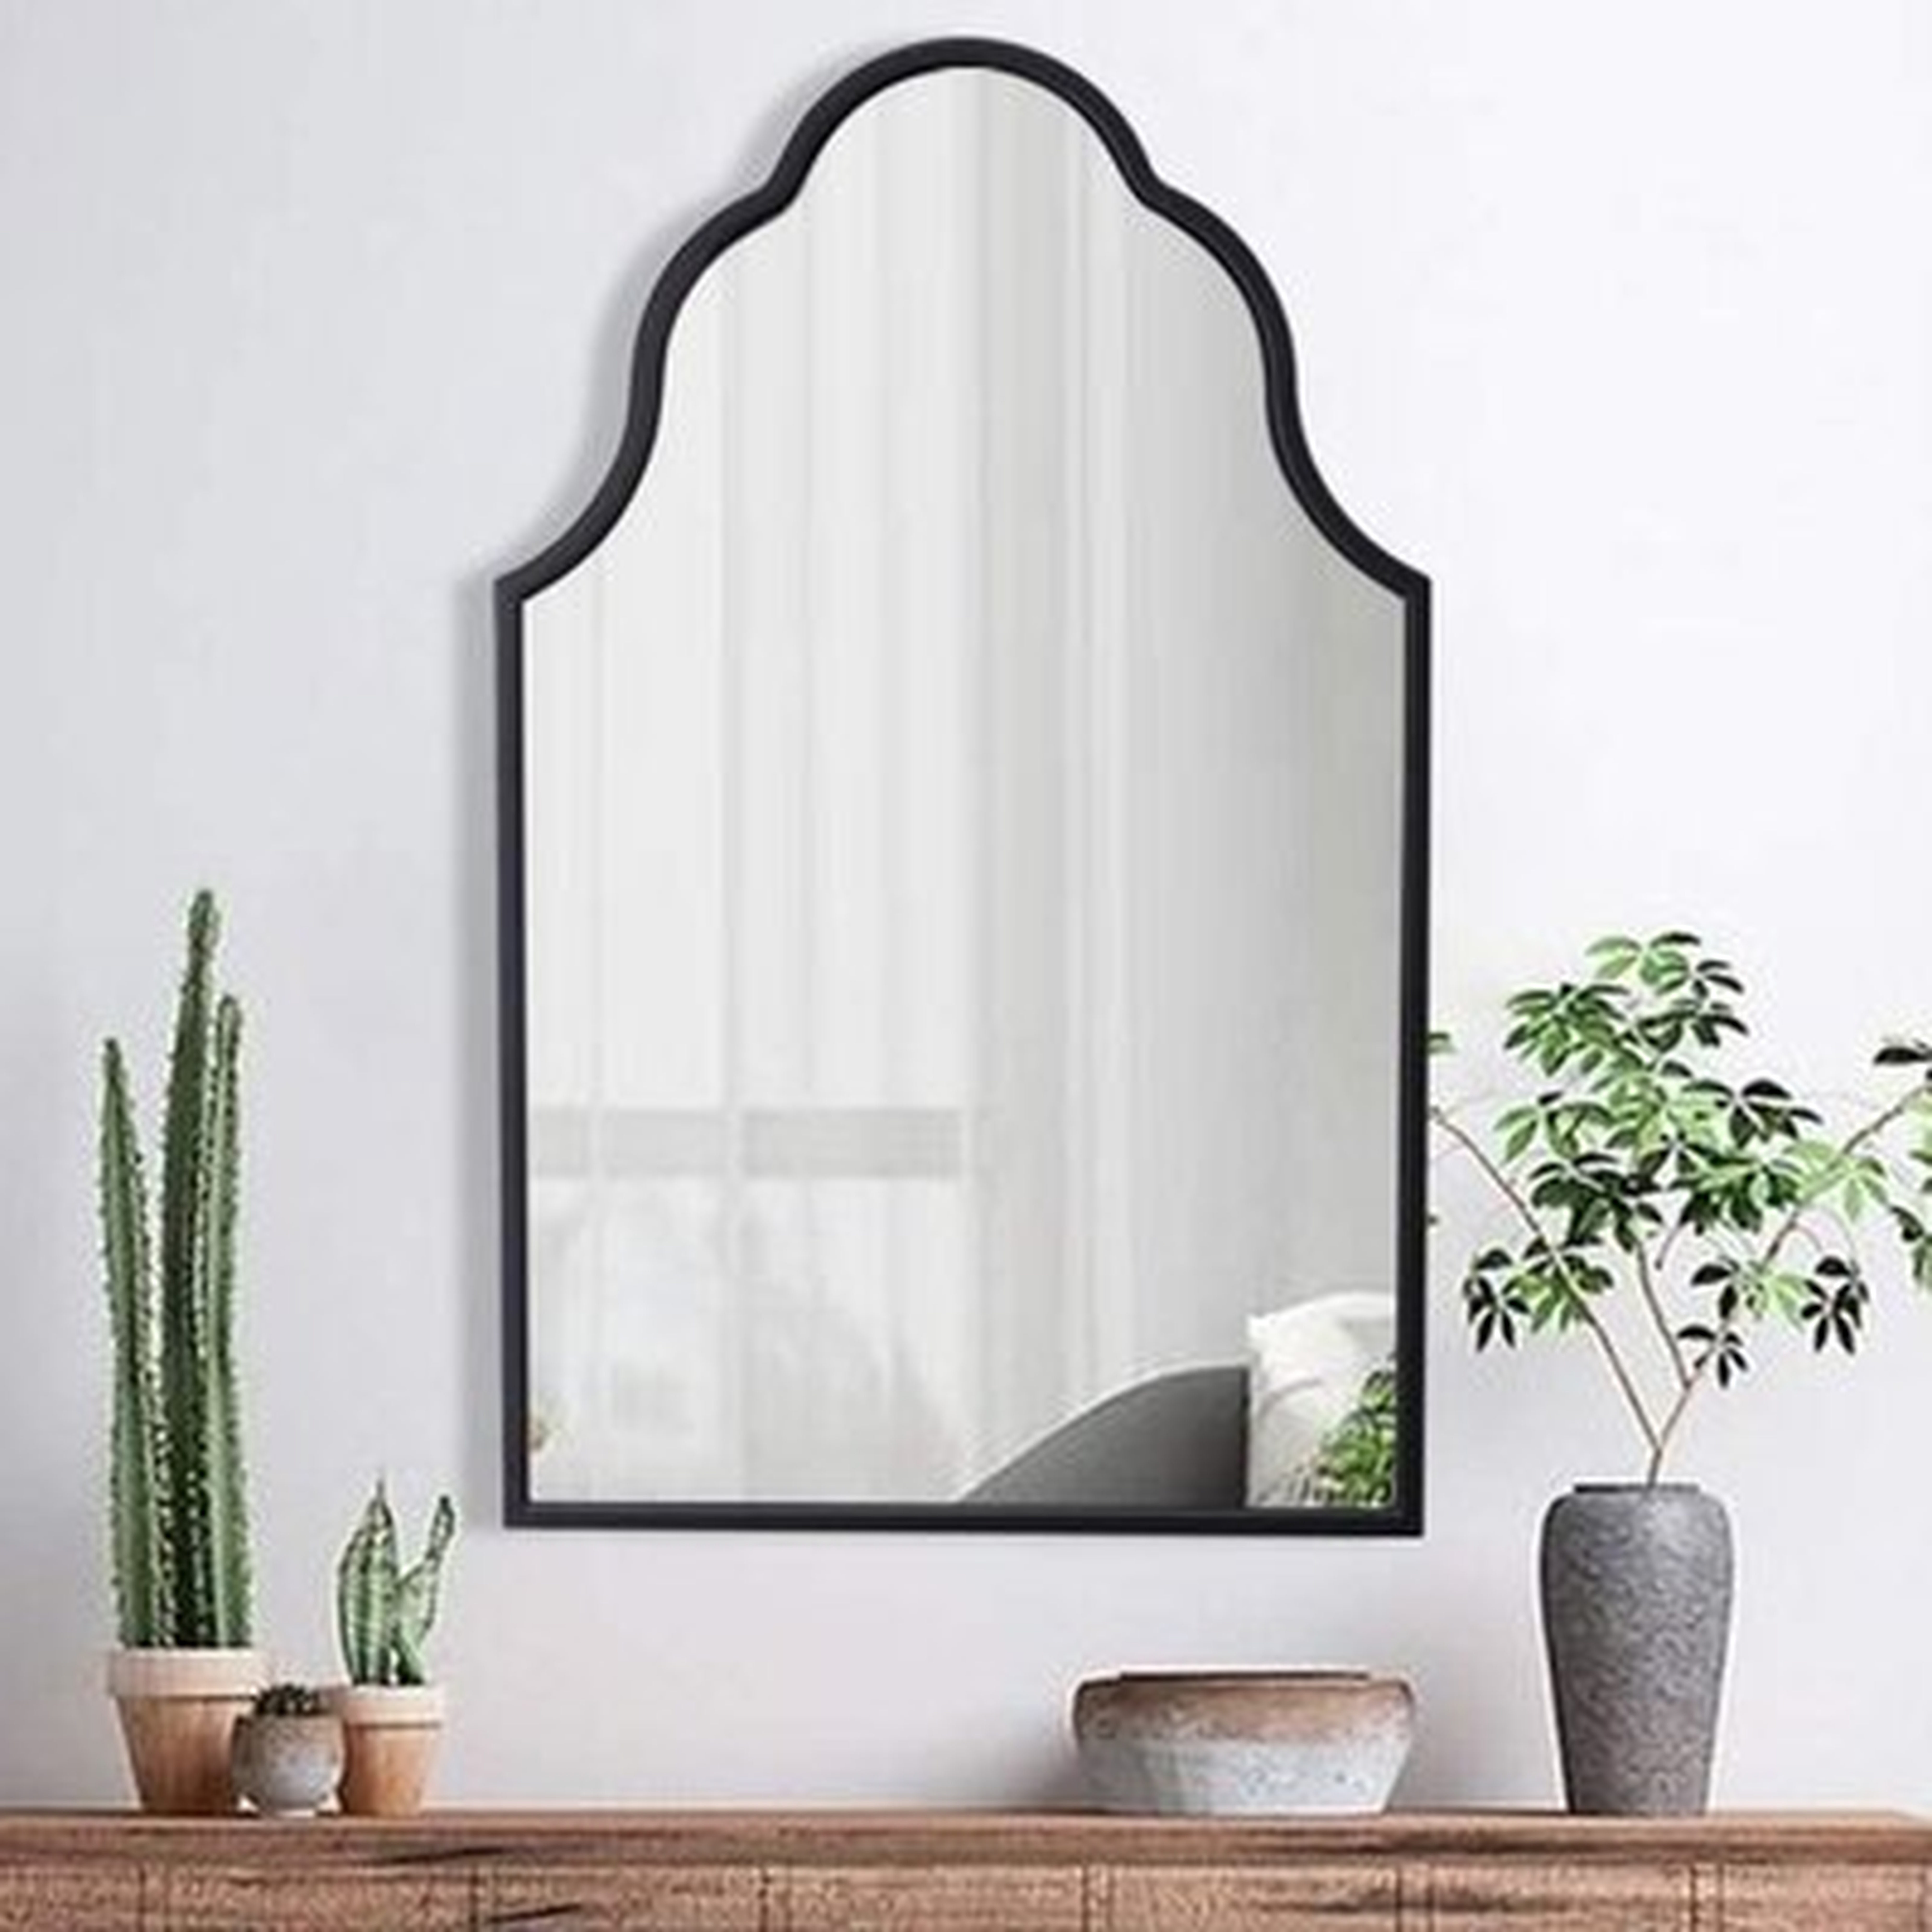 Arch Wall Mirror For Decor Antique Black Decorative Mirror With Wooden Frame Large Modern Accent Mirror For Foyer Bathroom Bedroom 32" H X 20" W - Wayfair